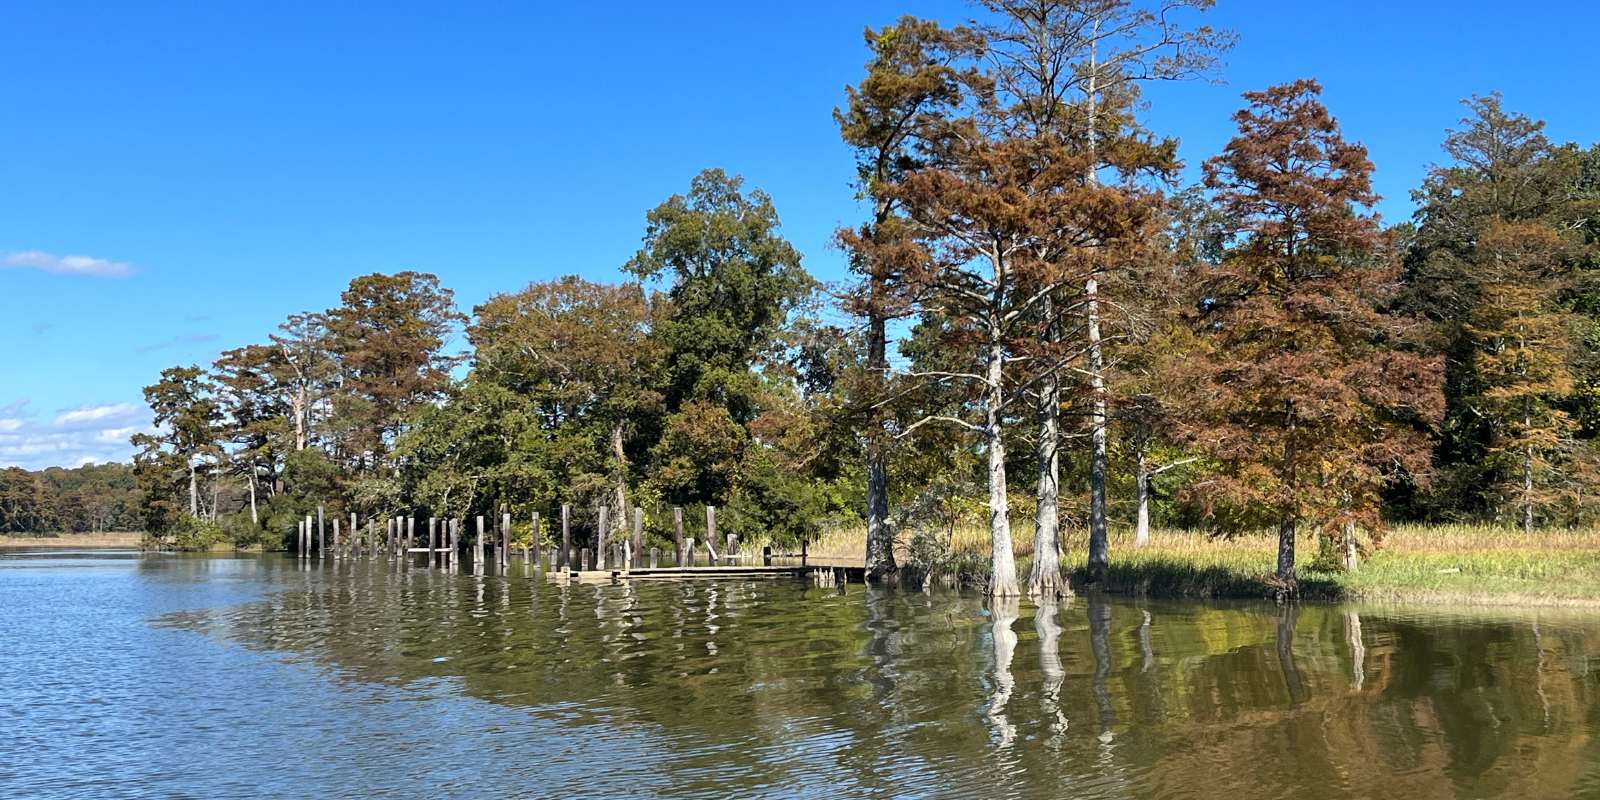 An image of a channel on Gray's creek with cypress trees along the edge